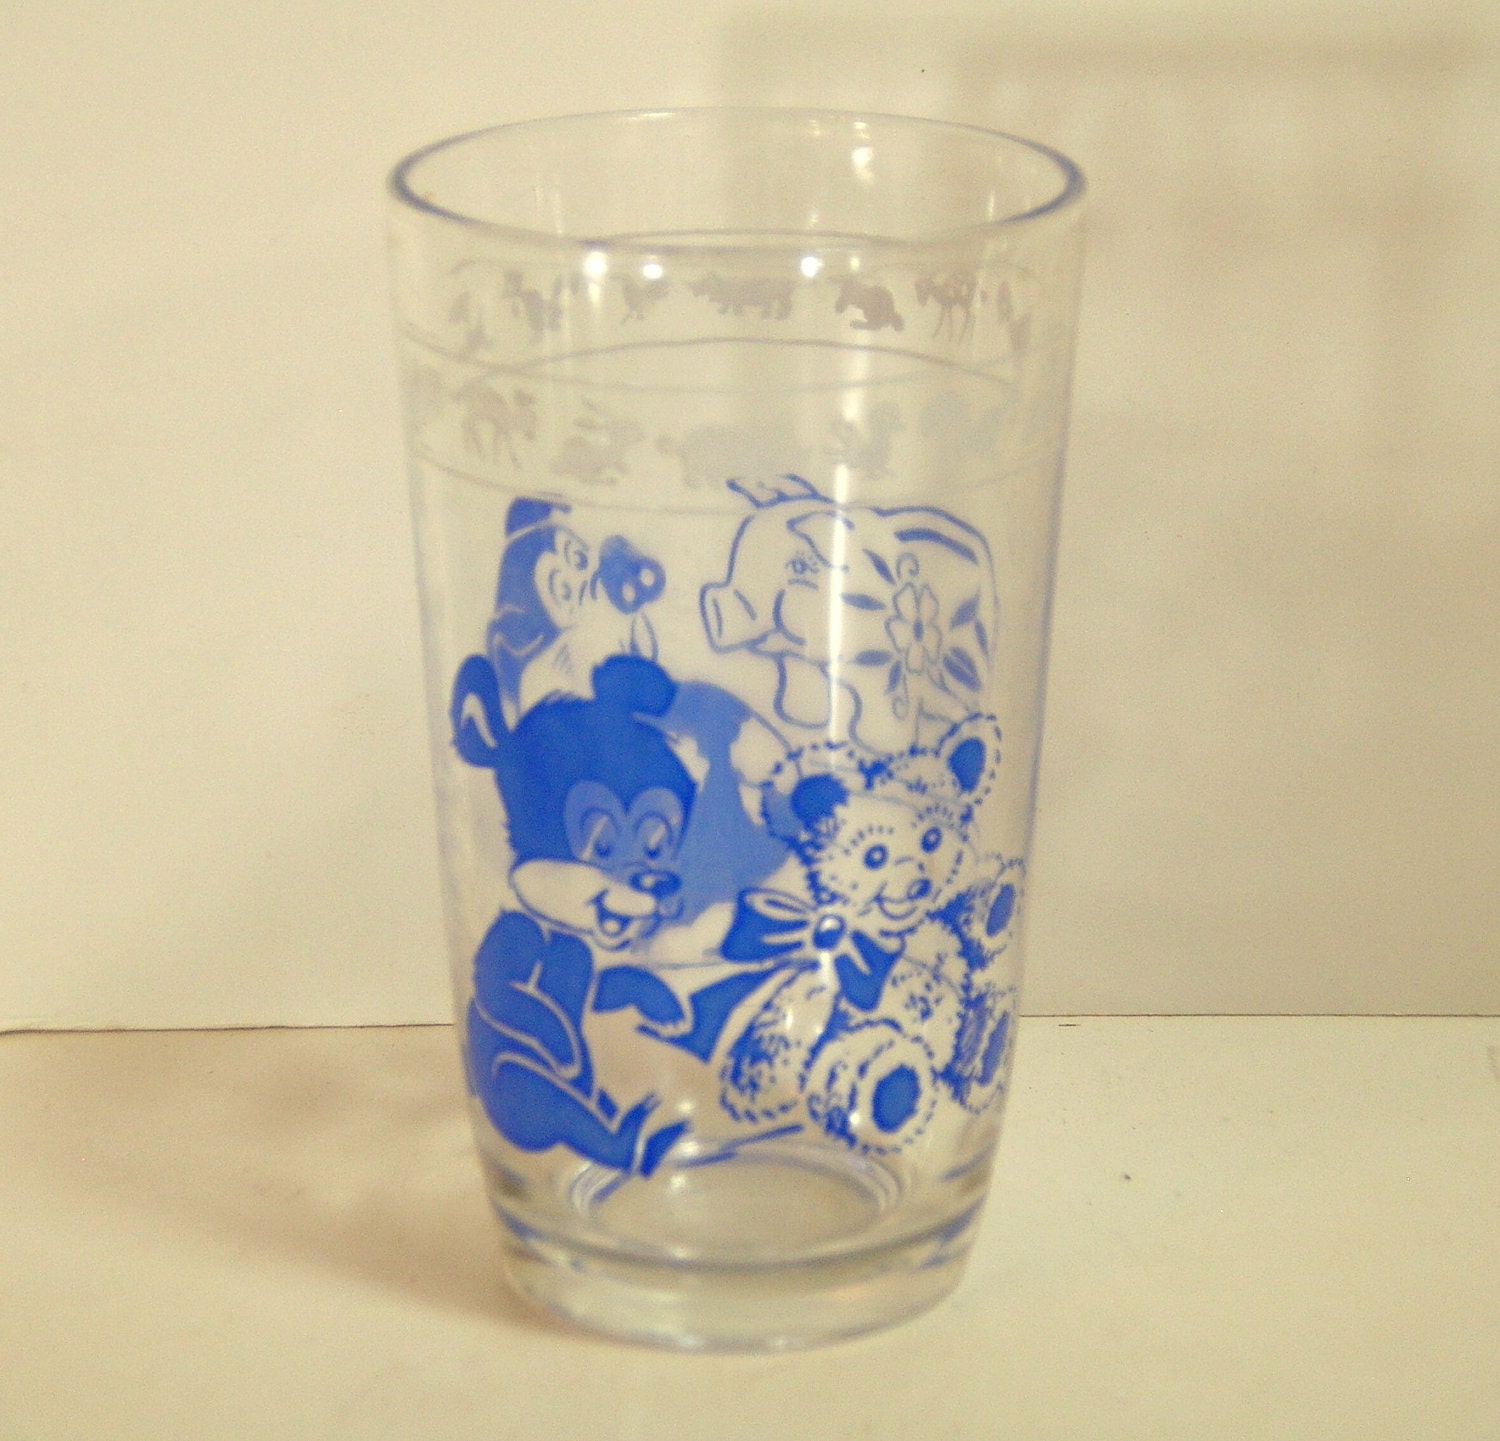 Vintage Cartoon Drinking Glass by BountifulGoods on Etsy